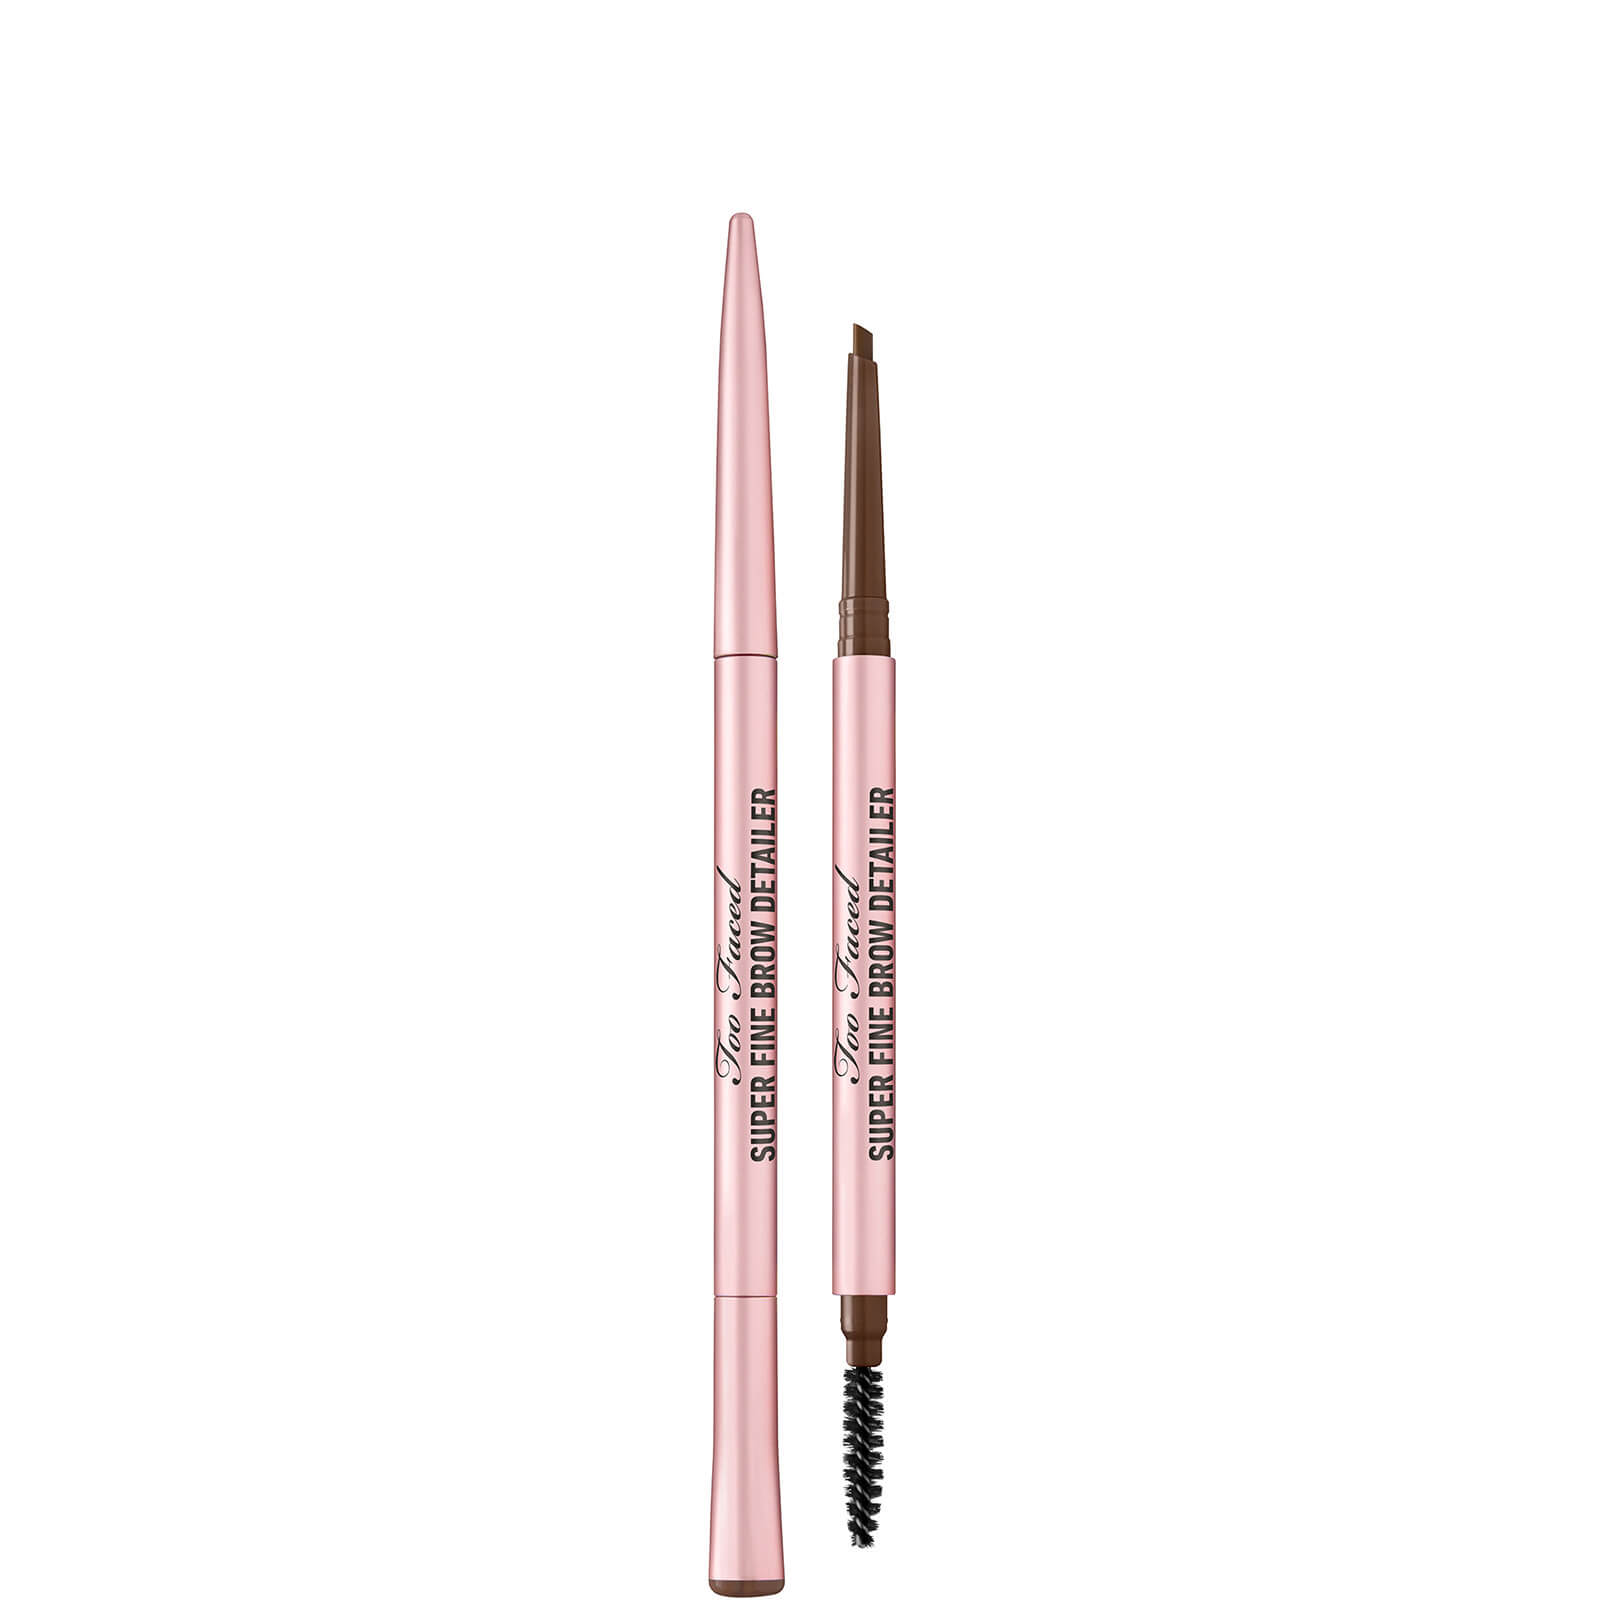 Image of Too Faced Superfine Brow Detailer Ultra Slim Brow Pencil 0.08g (Various Shades) - Dark Brown